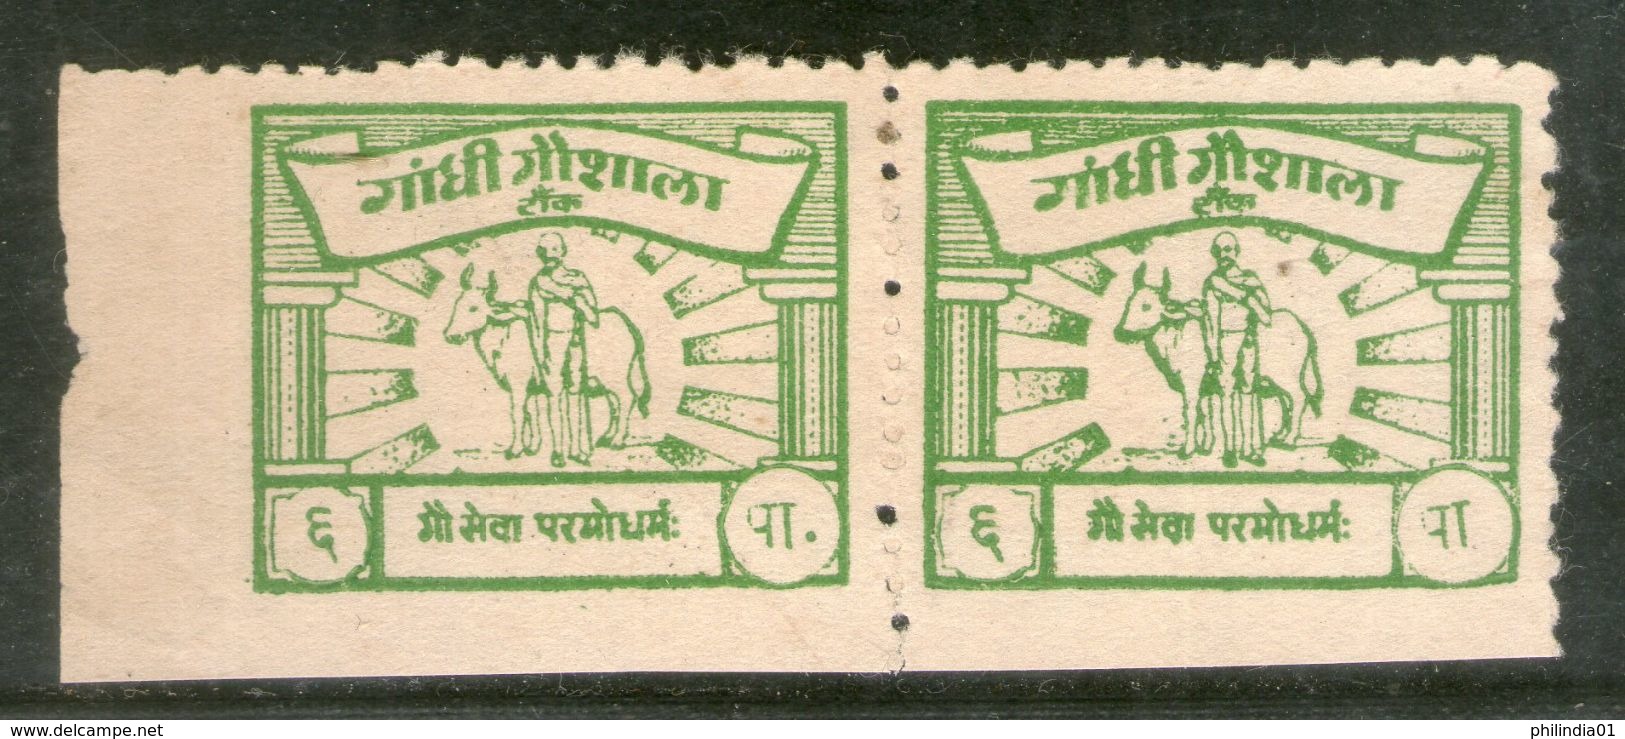 India 6ps Gandhi Gaushala Tonk Charity Label Pair Extremely RARE # 2451 - Timbres De Bienfaisance